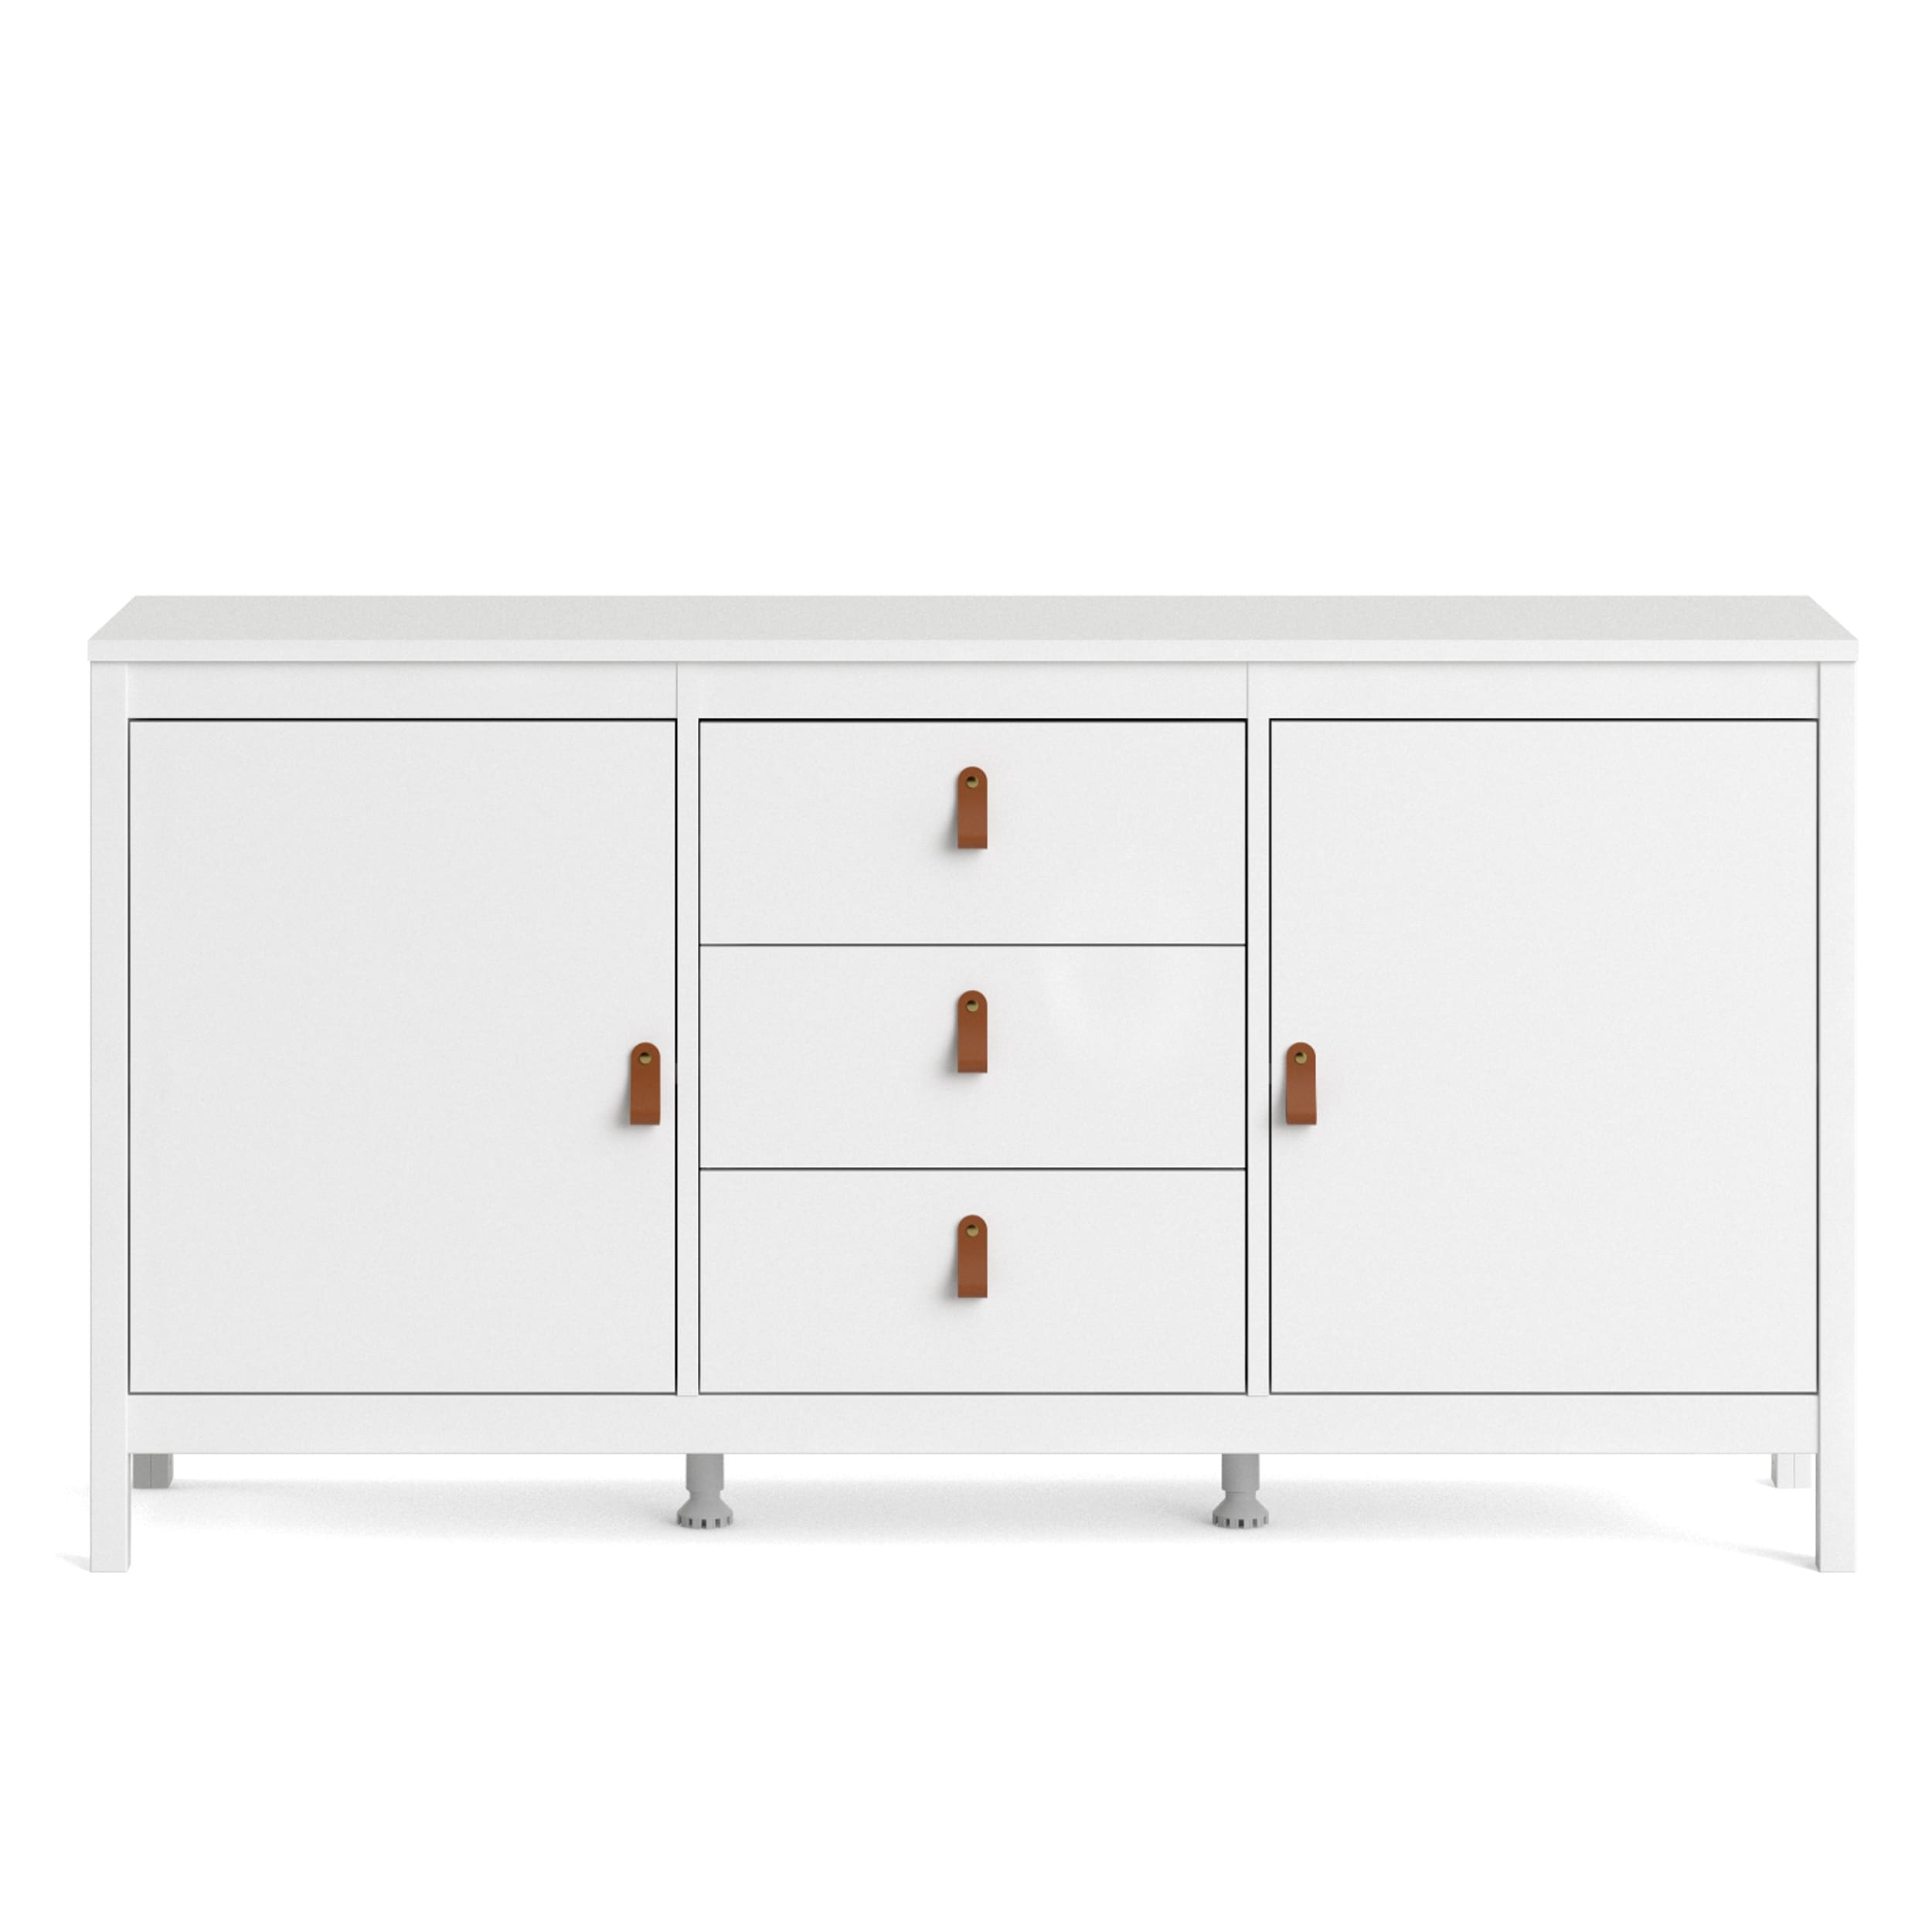 & Porch with Sale Beyond Den & Bed Bath 3-Drawers Sideboard Madrid 33673465 - - - On 2-Door